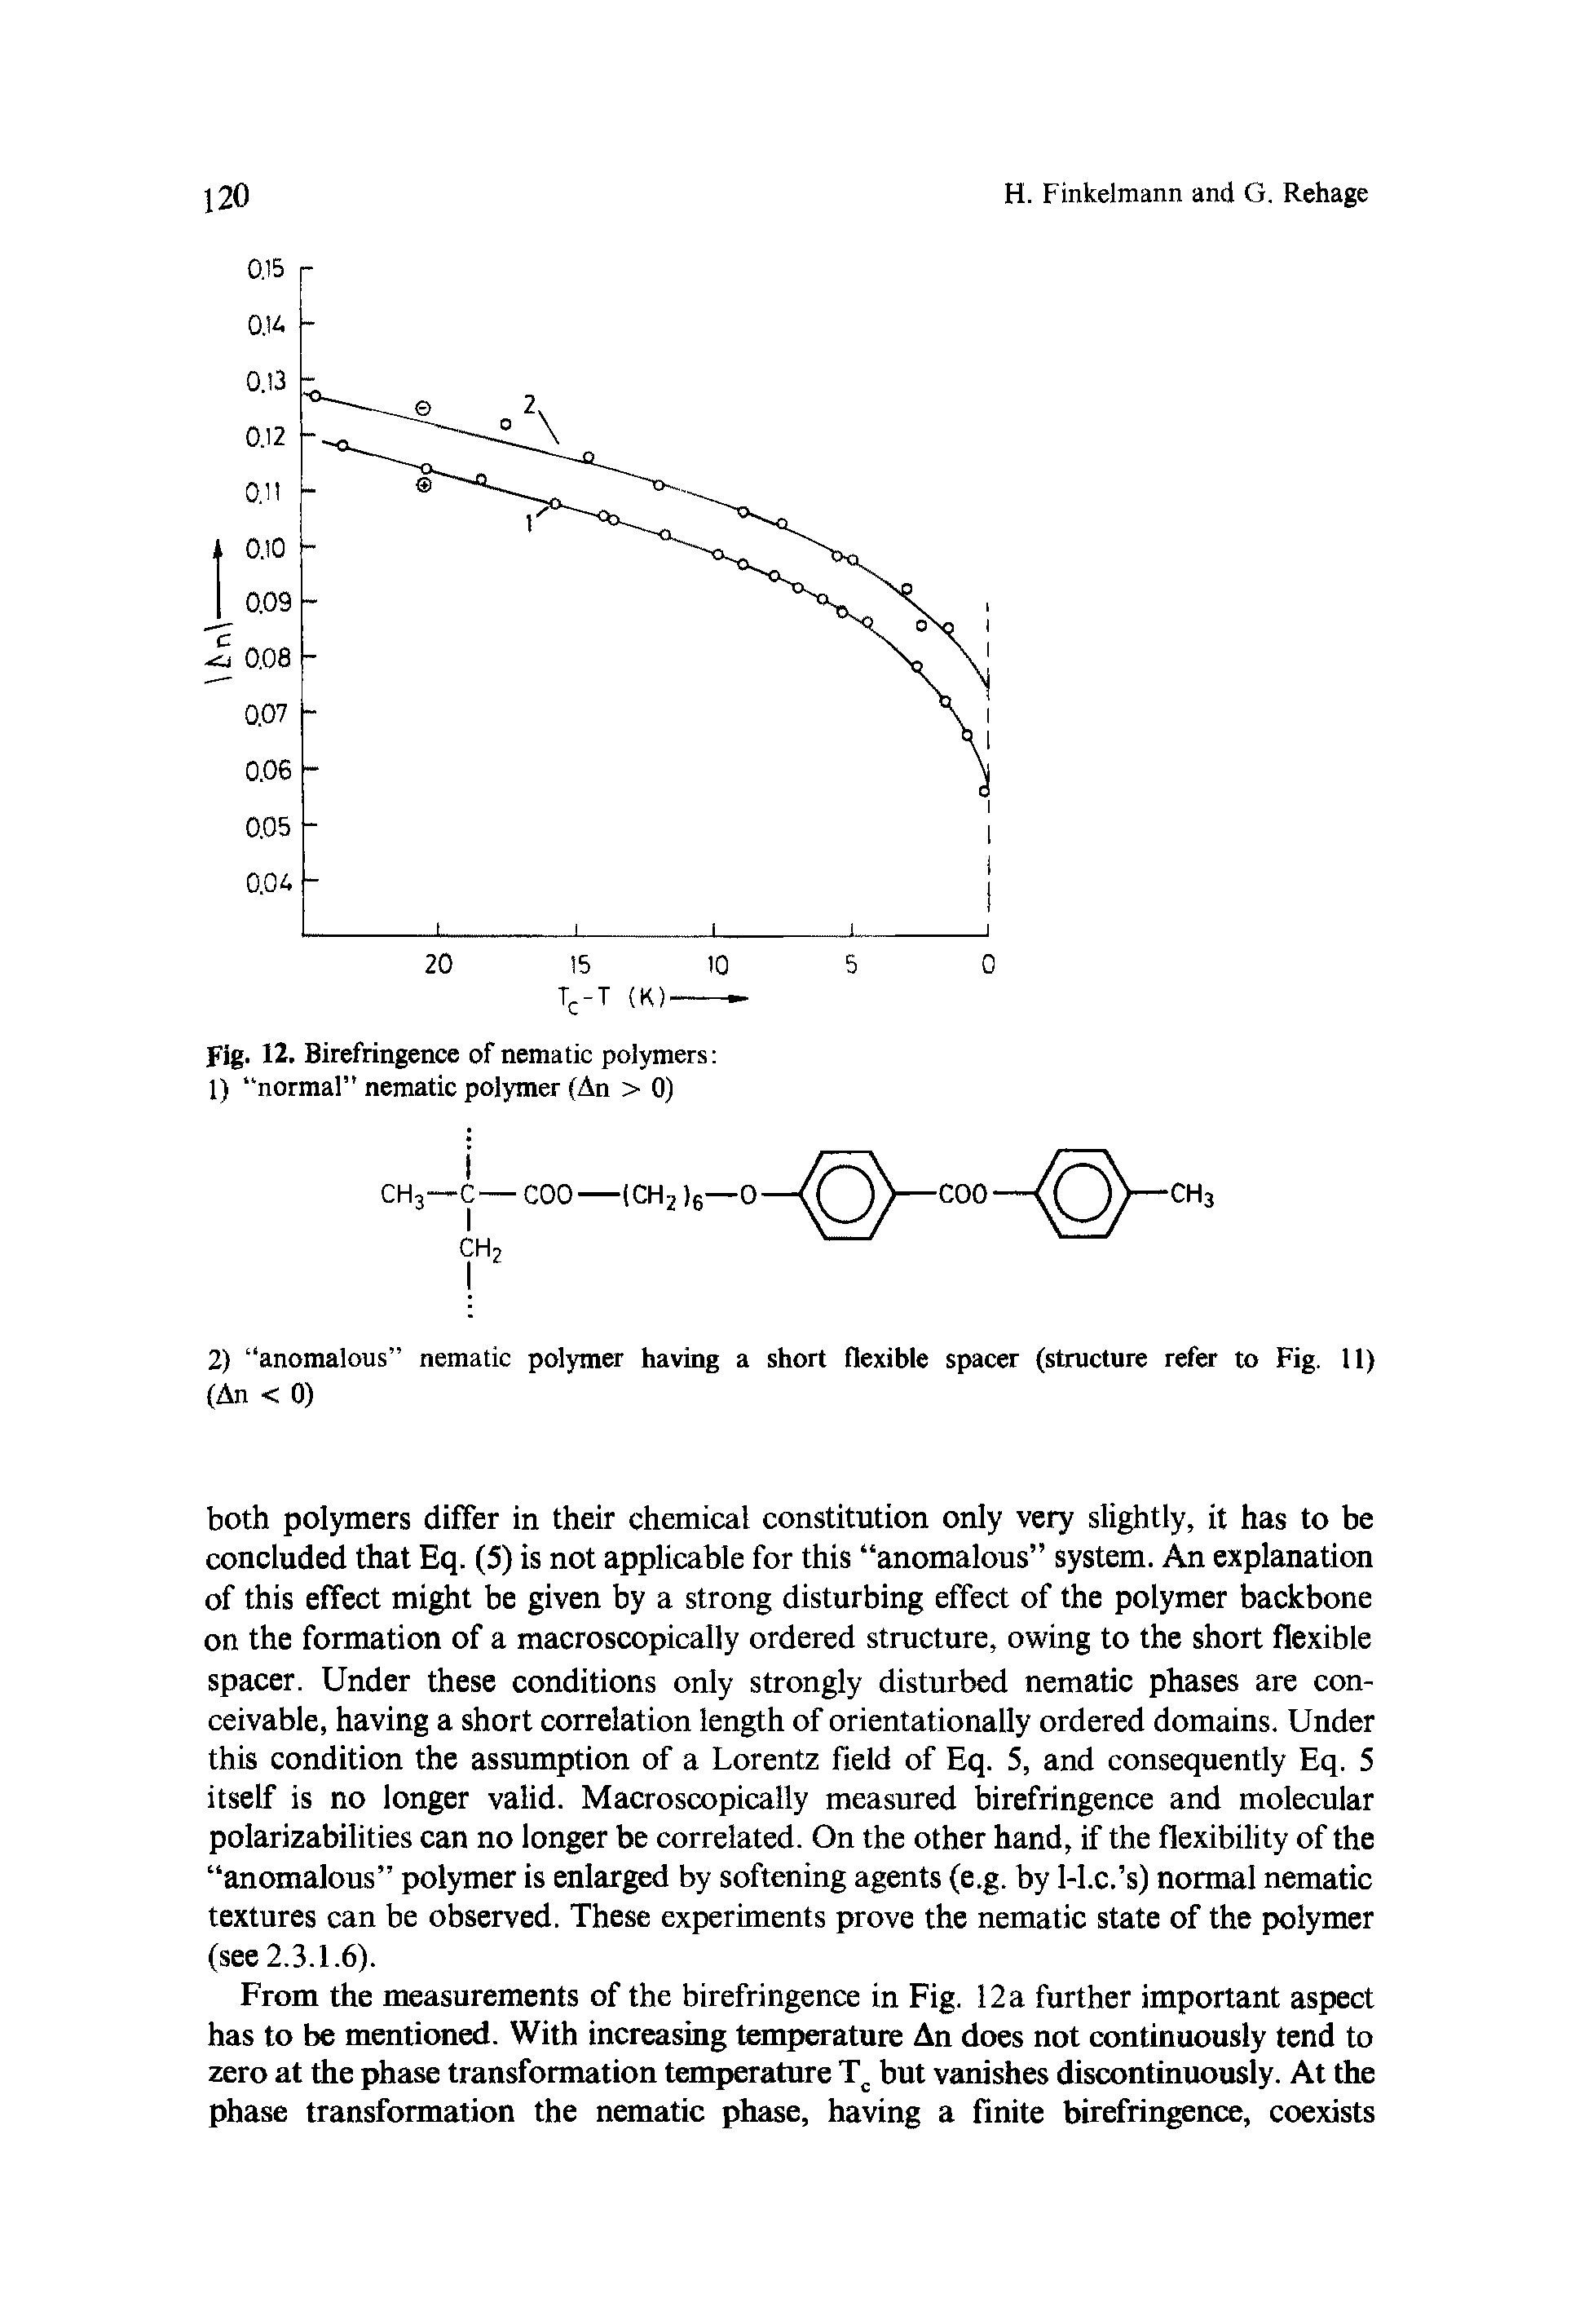 Fig. 12. Birefringence of nematic polymers 1) normal nematic polymer (An > 0)...